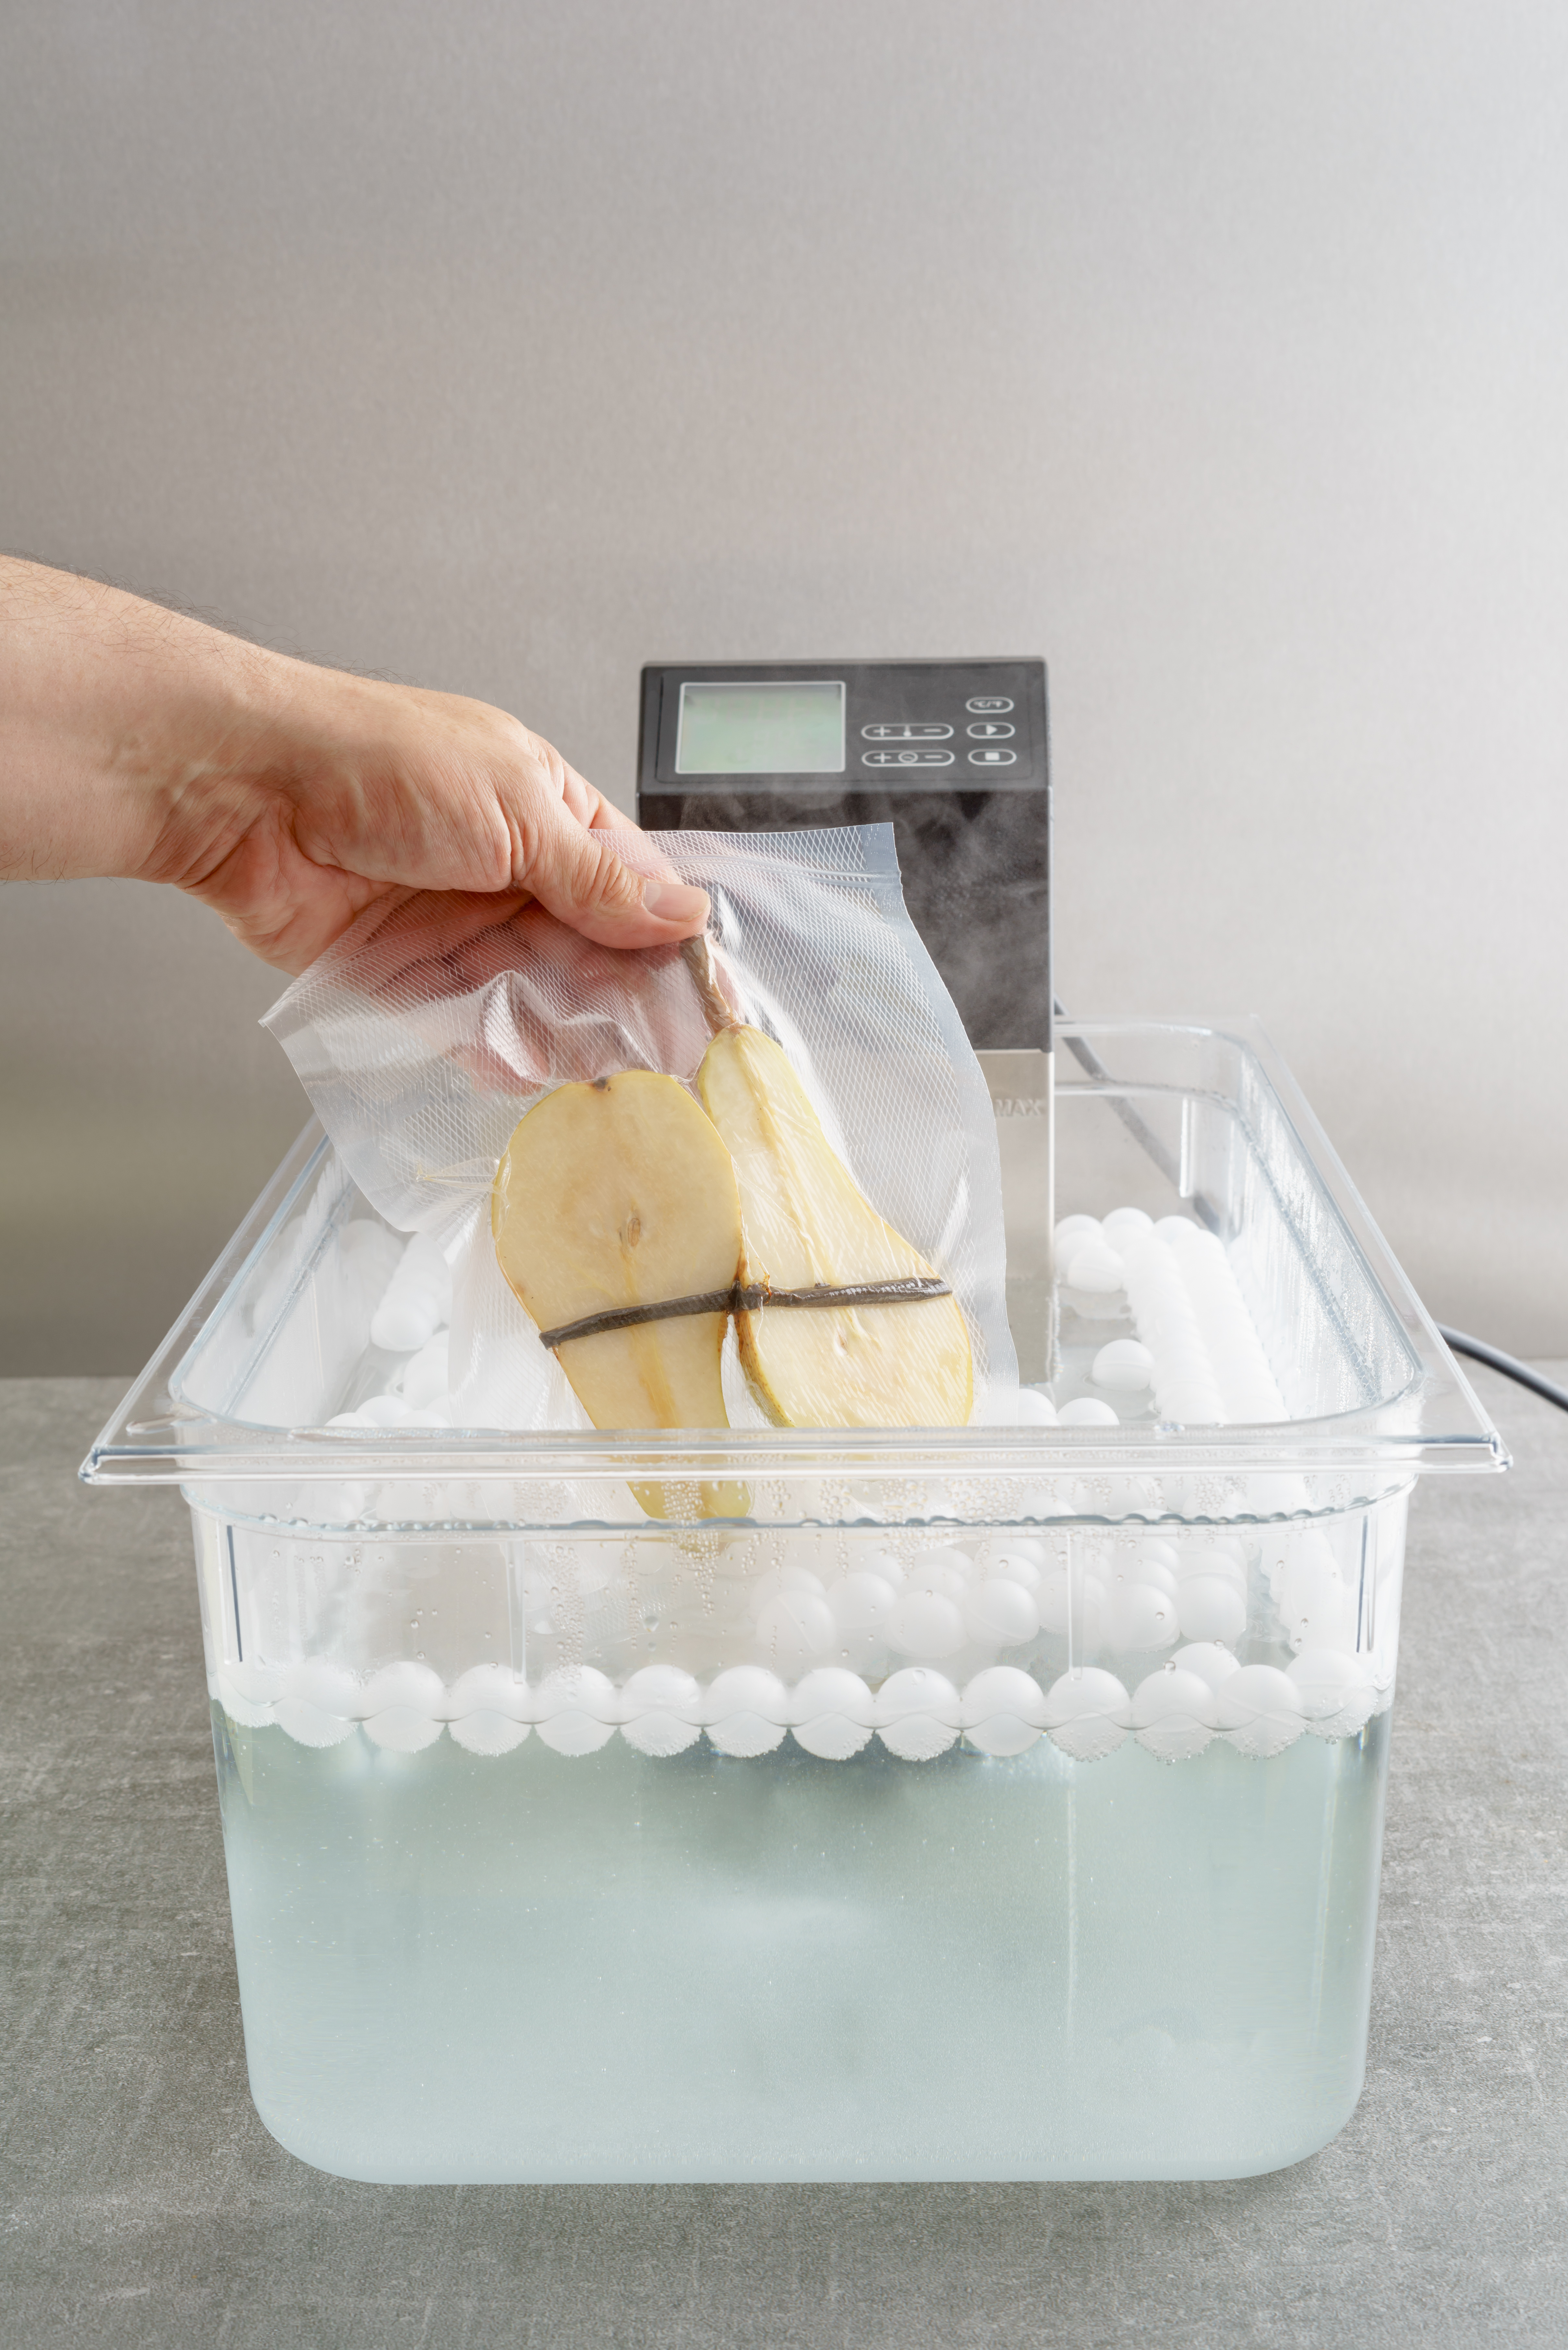 Sous vide cooking of pears